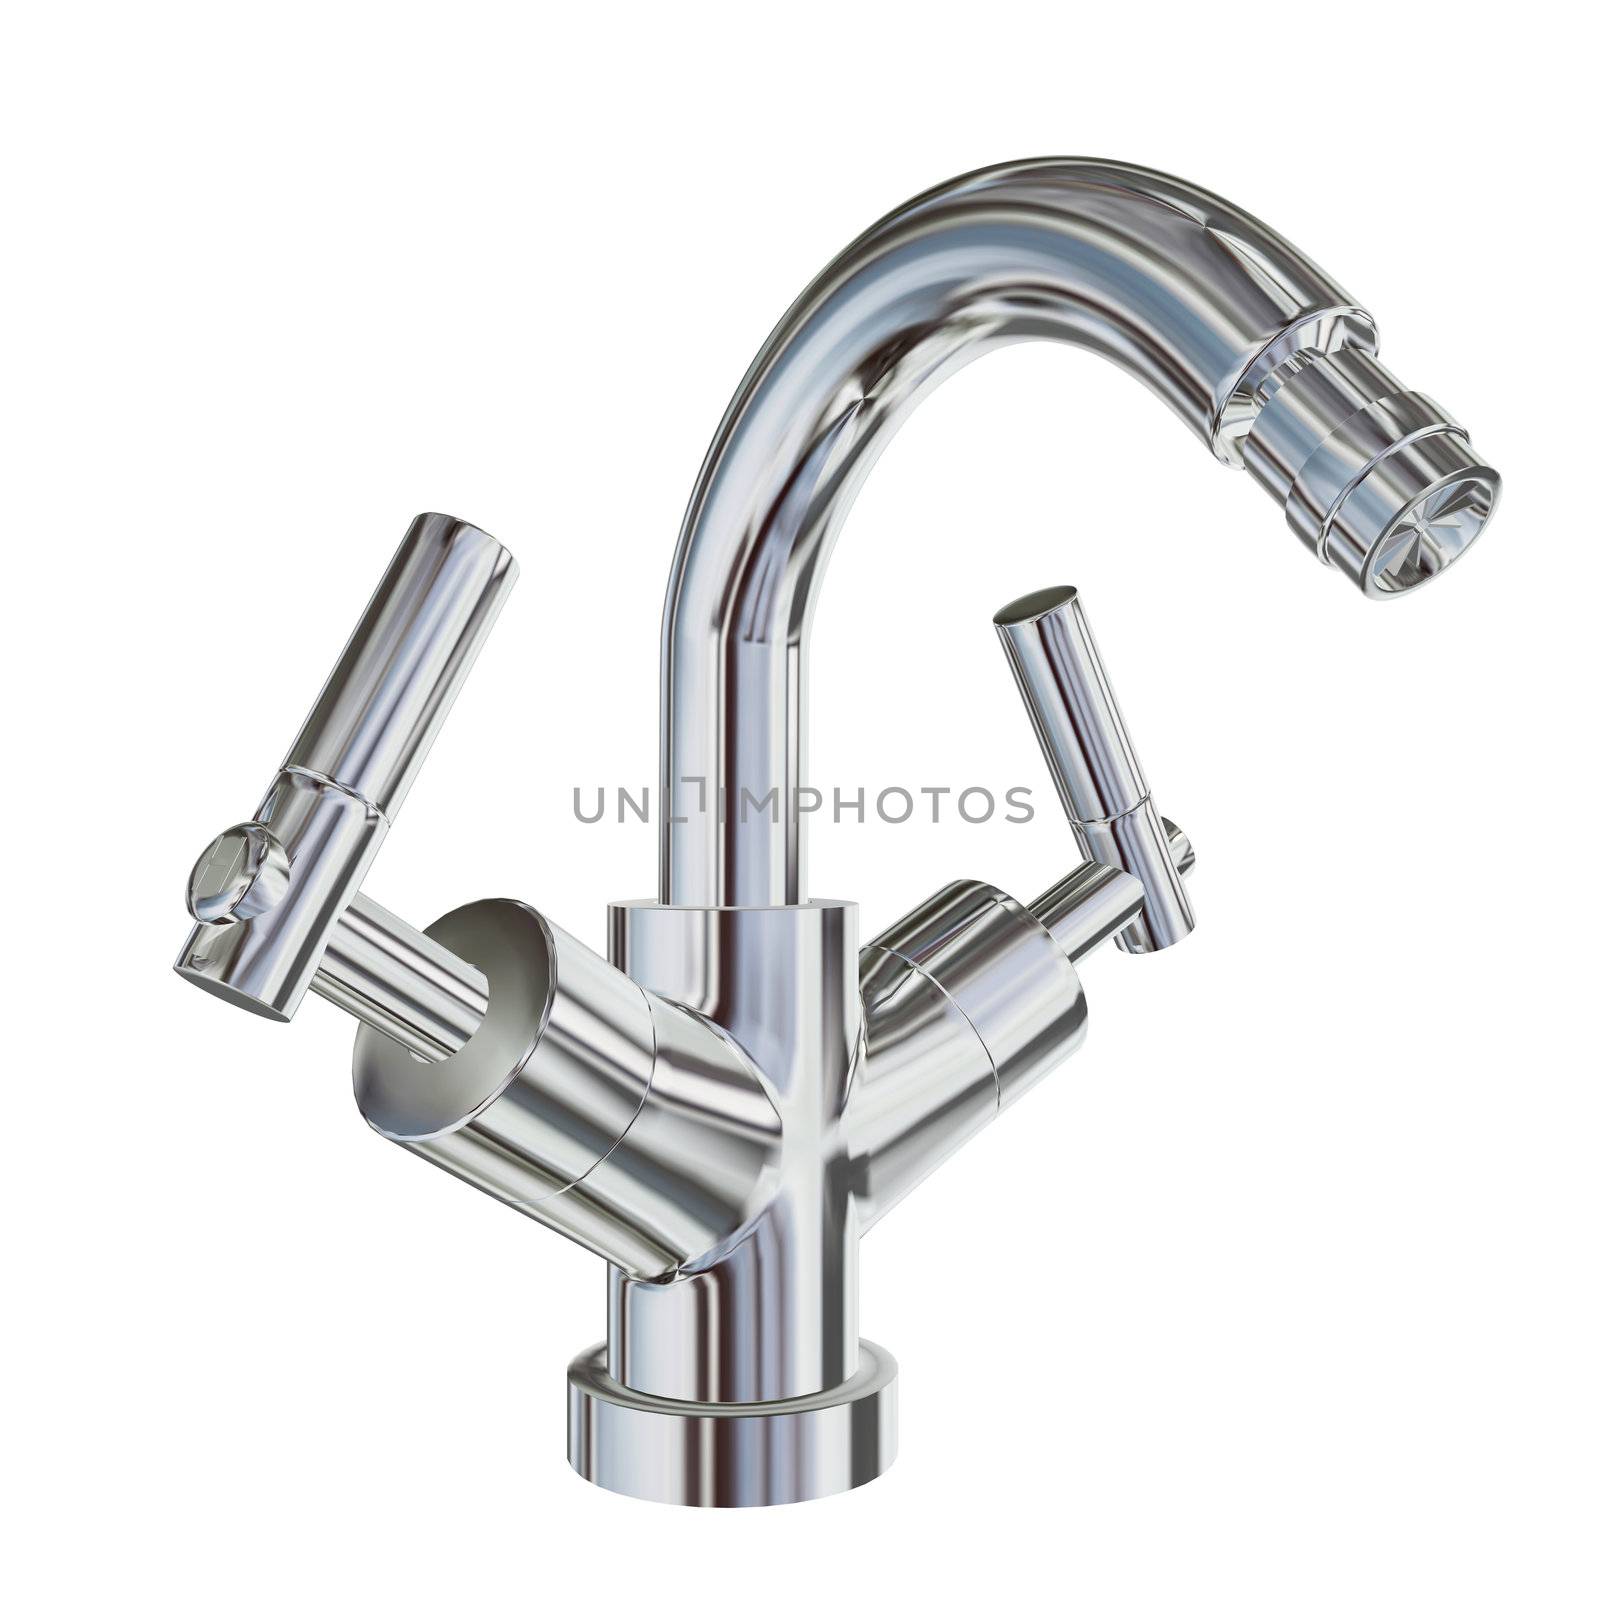 Shining chrome kitchen faucet by Morphart